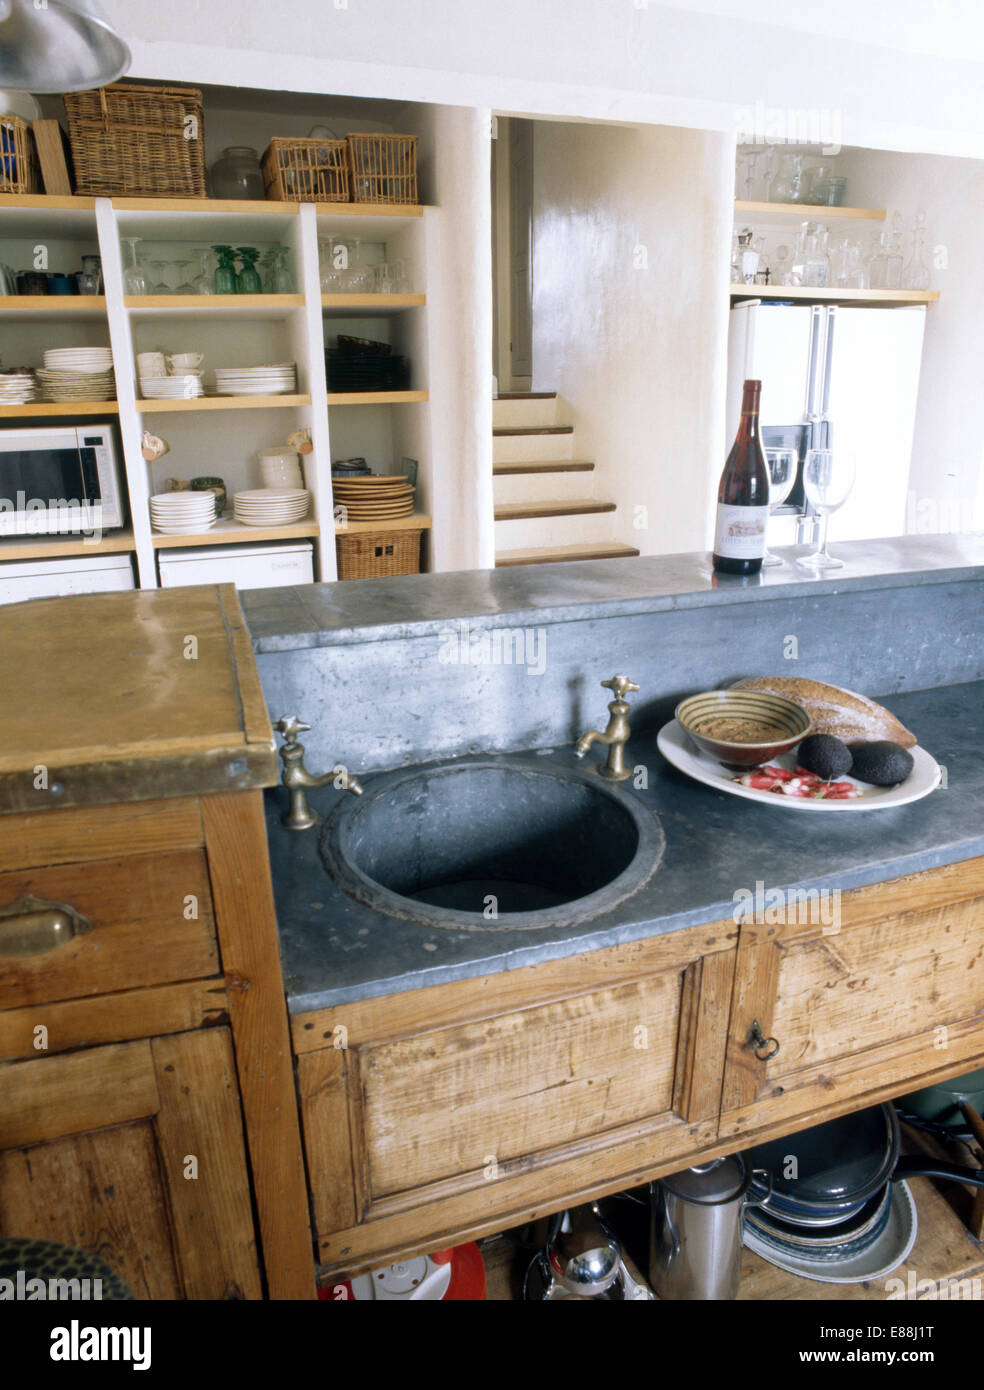 Circular Antique Zinc Sink Set Into Zinc Topped Old Wooden